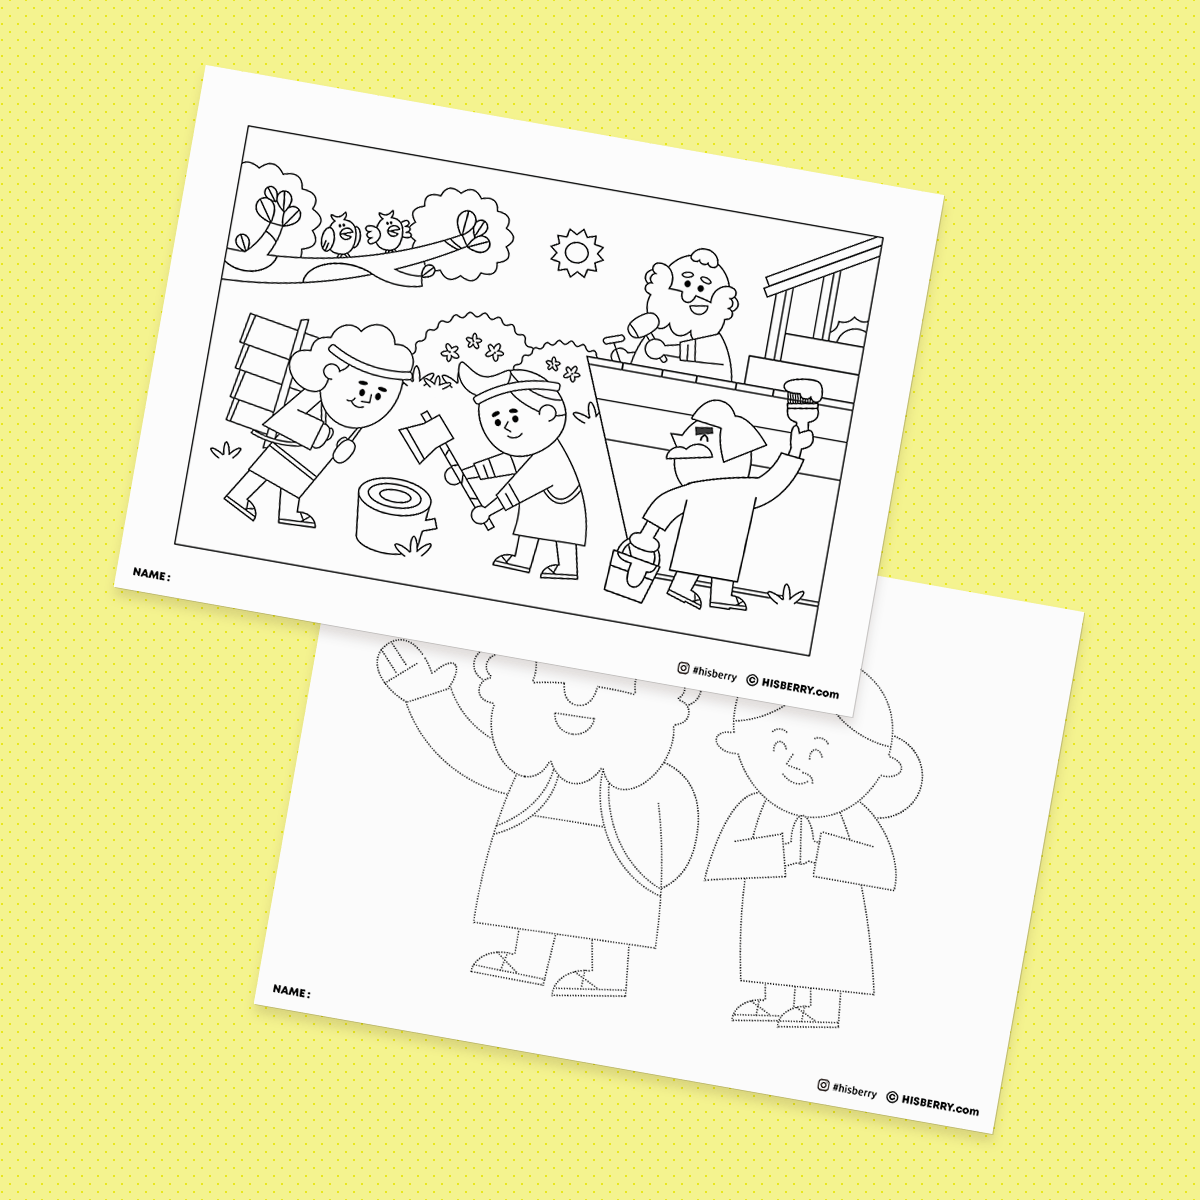 noah the name coloring pages